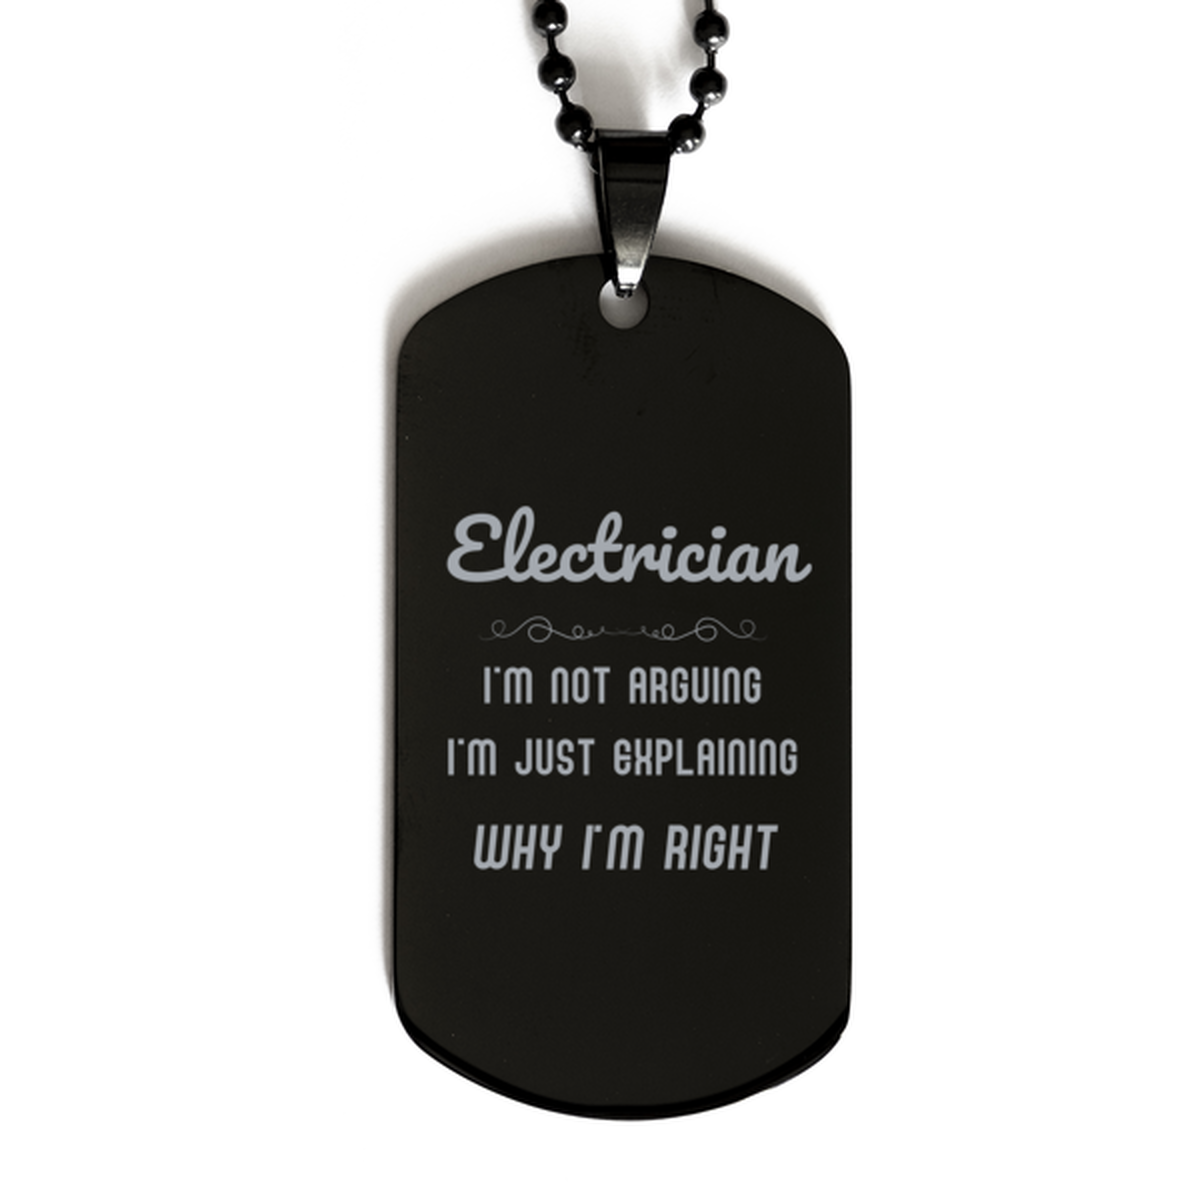 Electrician I'm not Arguing. I'm Just Explaining Why I'm RIGHT Black Dog Tag, Funny Saying Quote Electrician Gifts For Electrician Graduation Birthday Christmas Gifts for Men Women Coworker